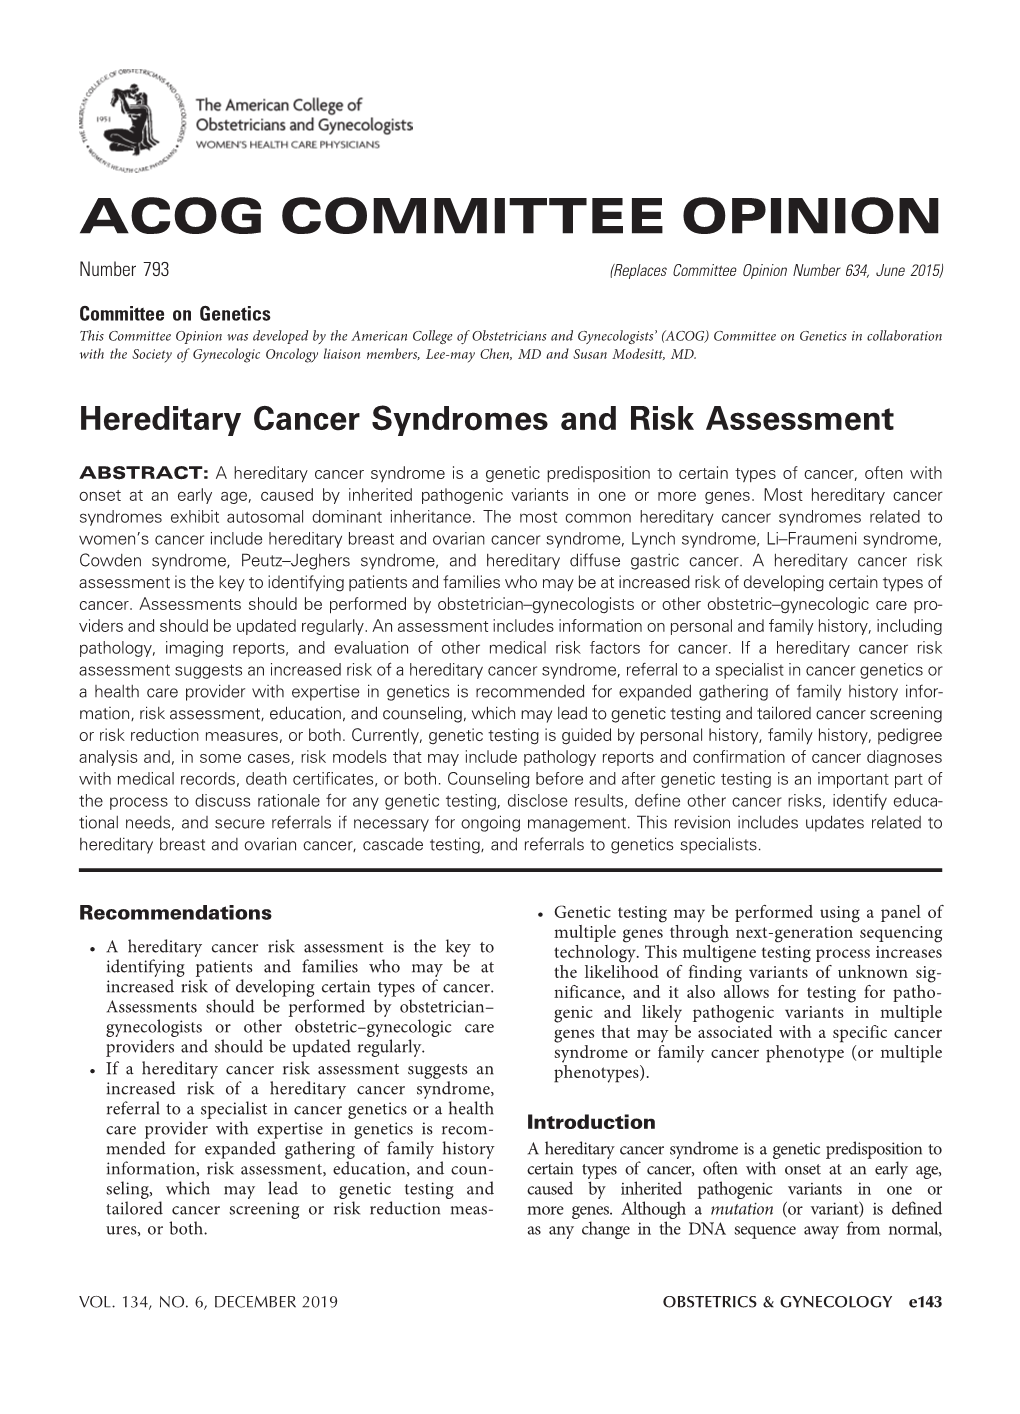 Hereditary Cancer Syndromes and Risk Assessment